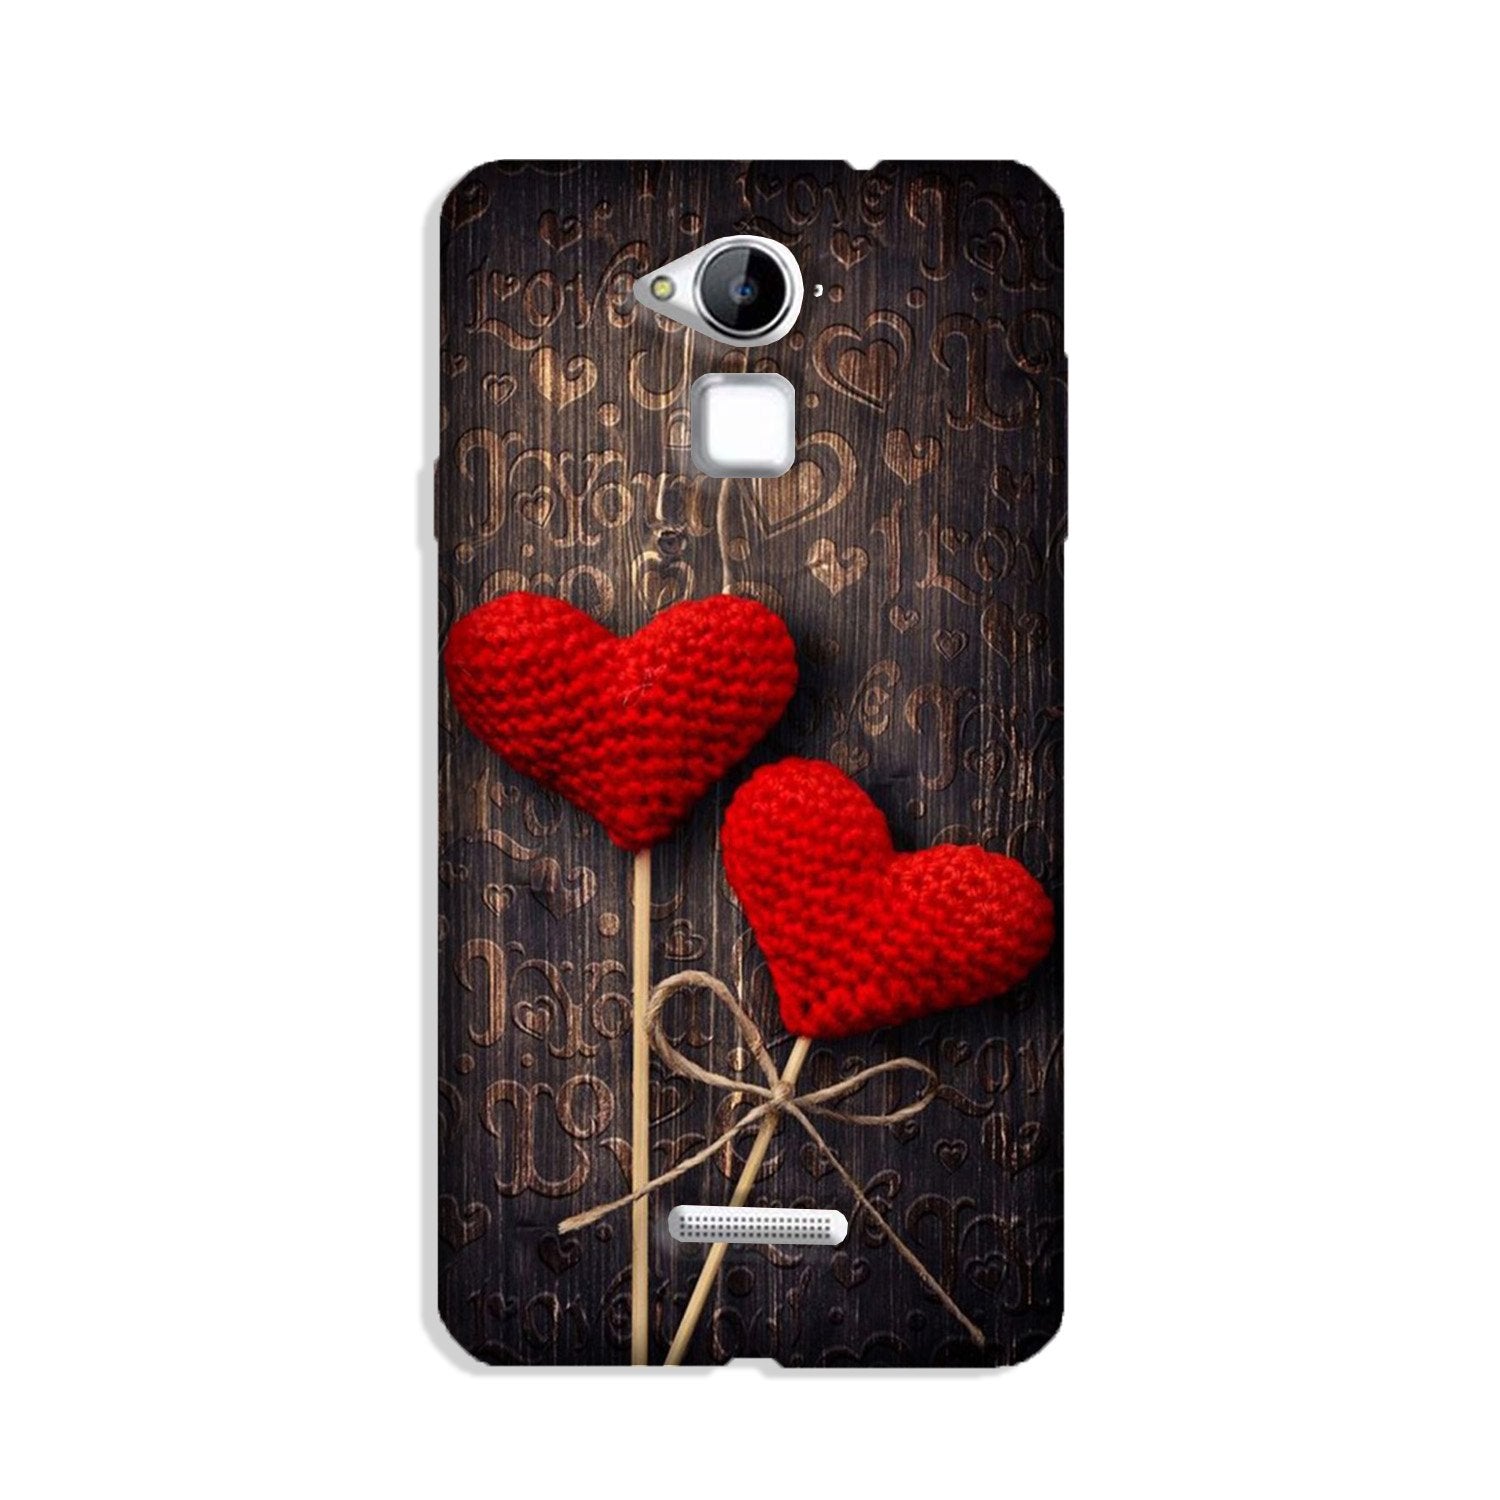 Red Hearts Case for Coolpad Note 3